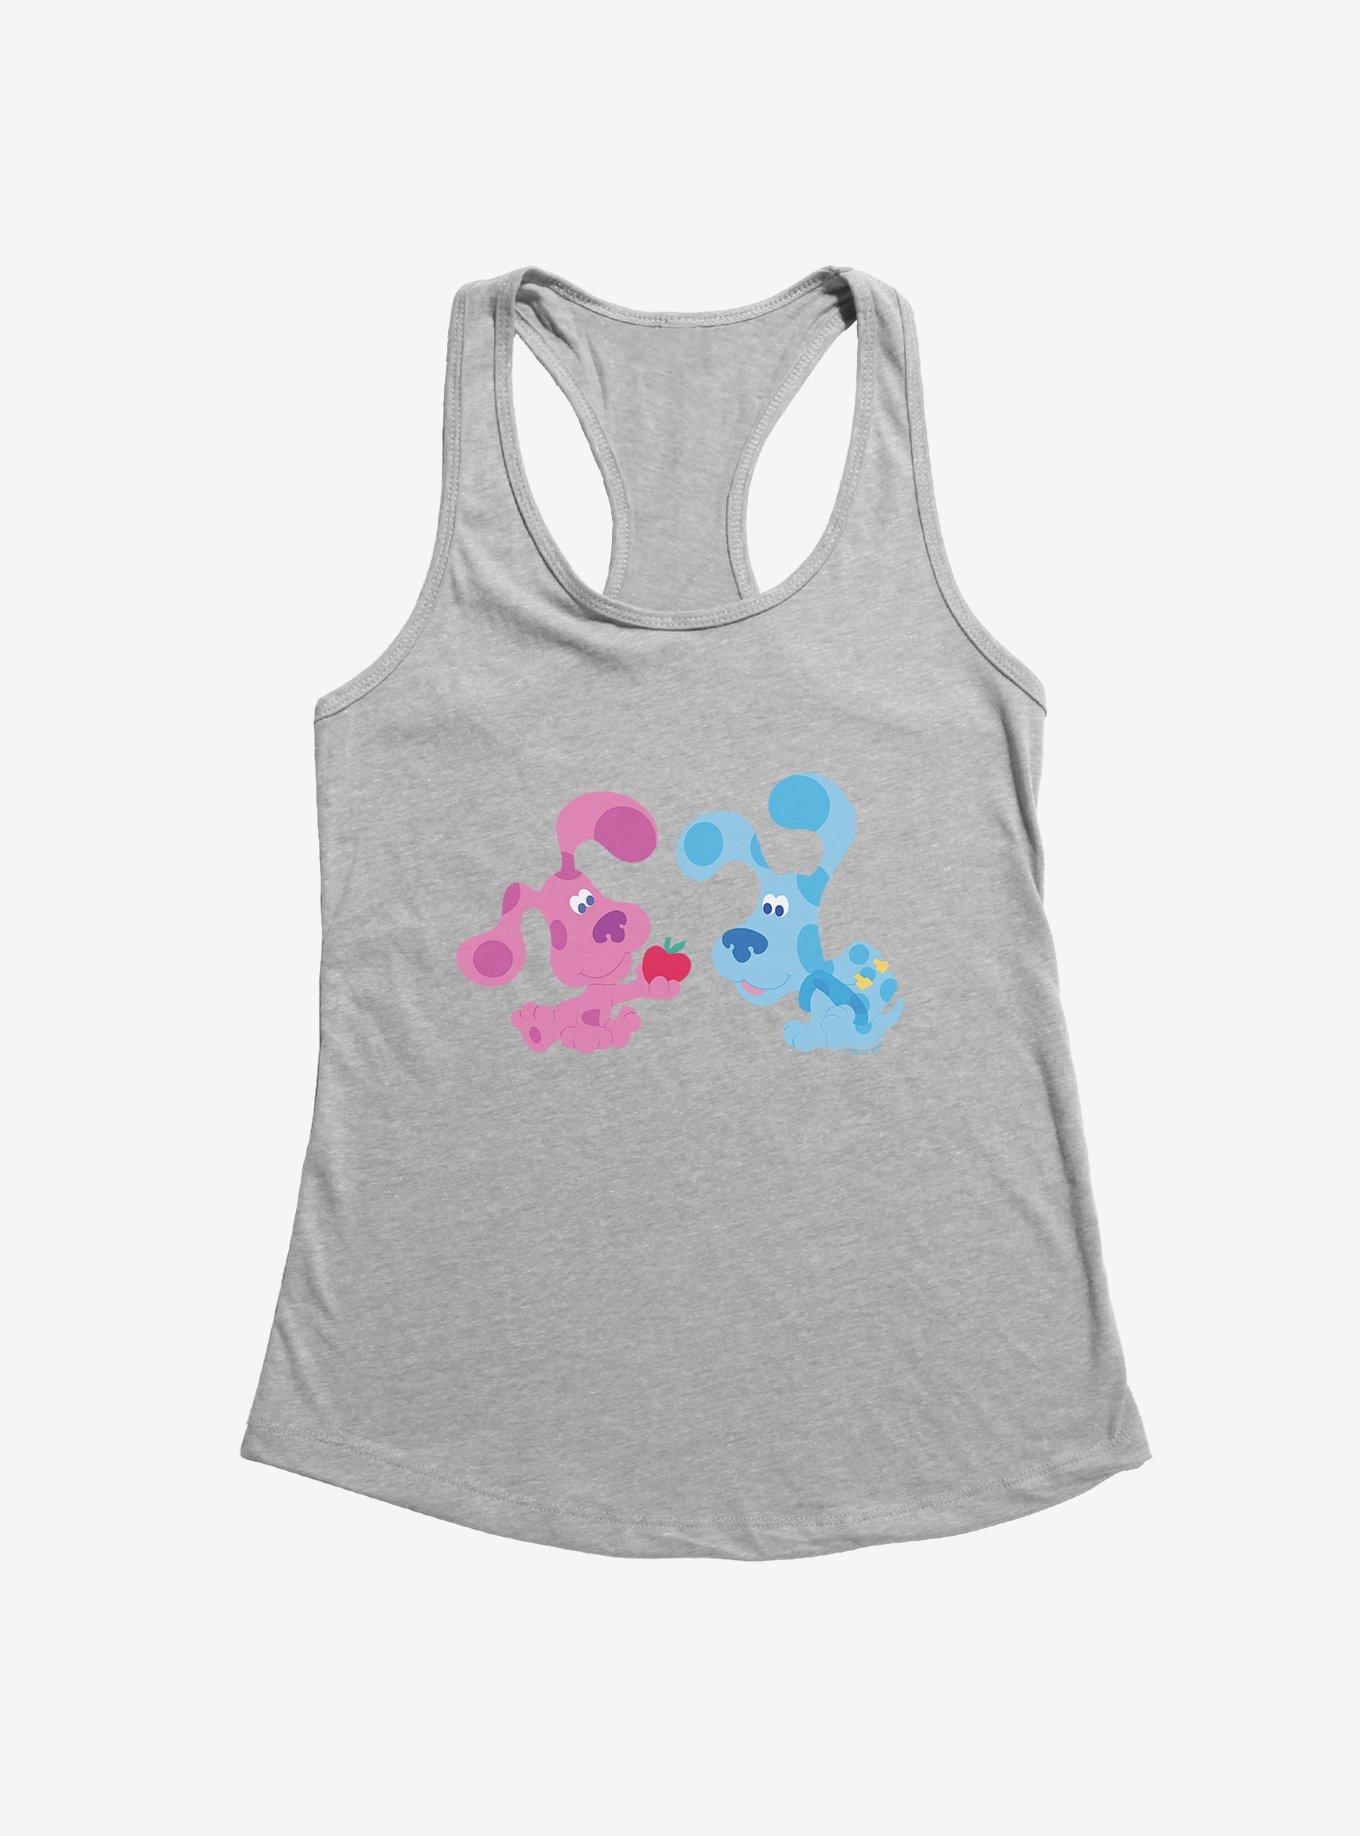 Blue's Clues Magenta And Blue Apple Girls Tank, HEATHER, hi-res